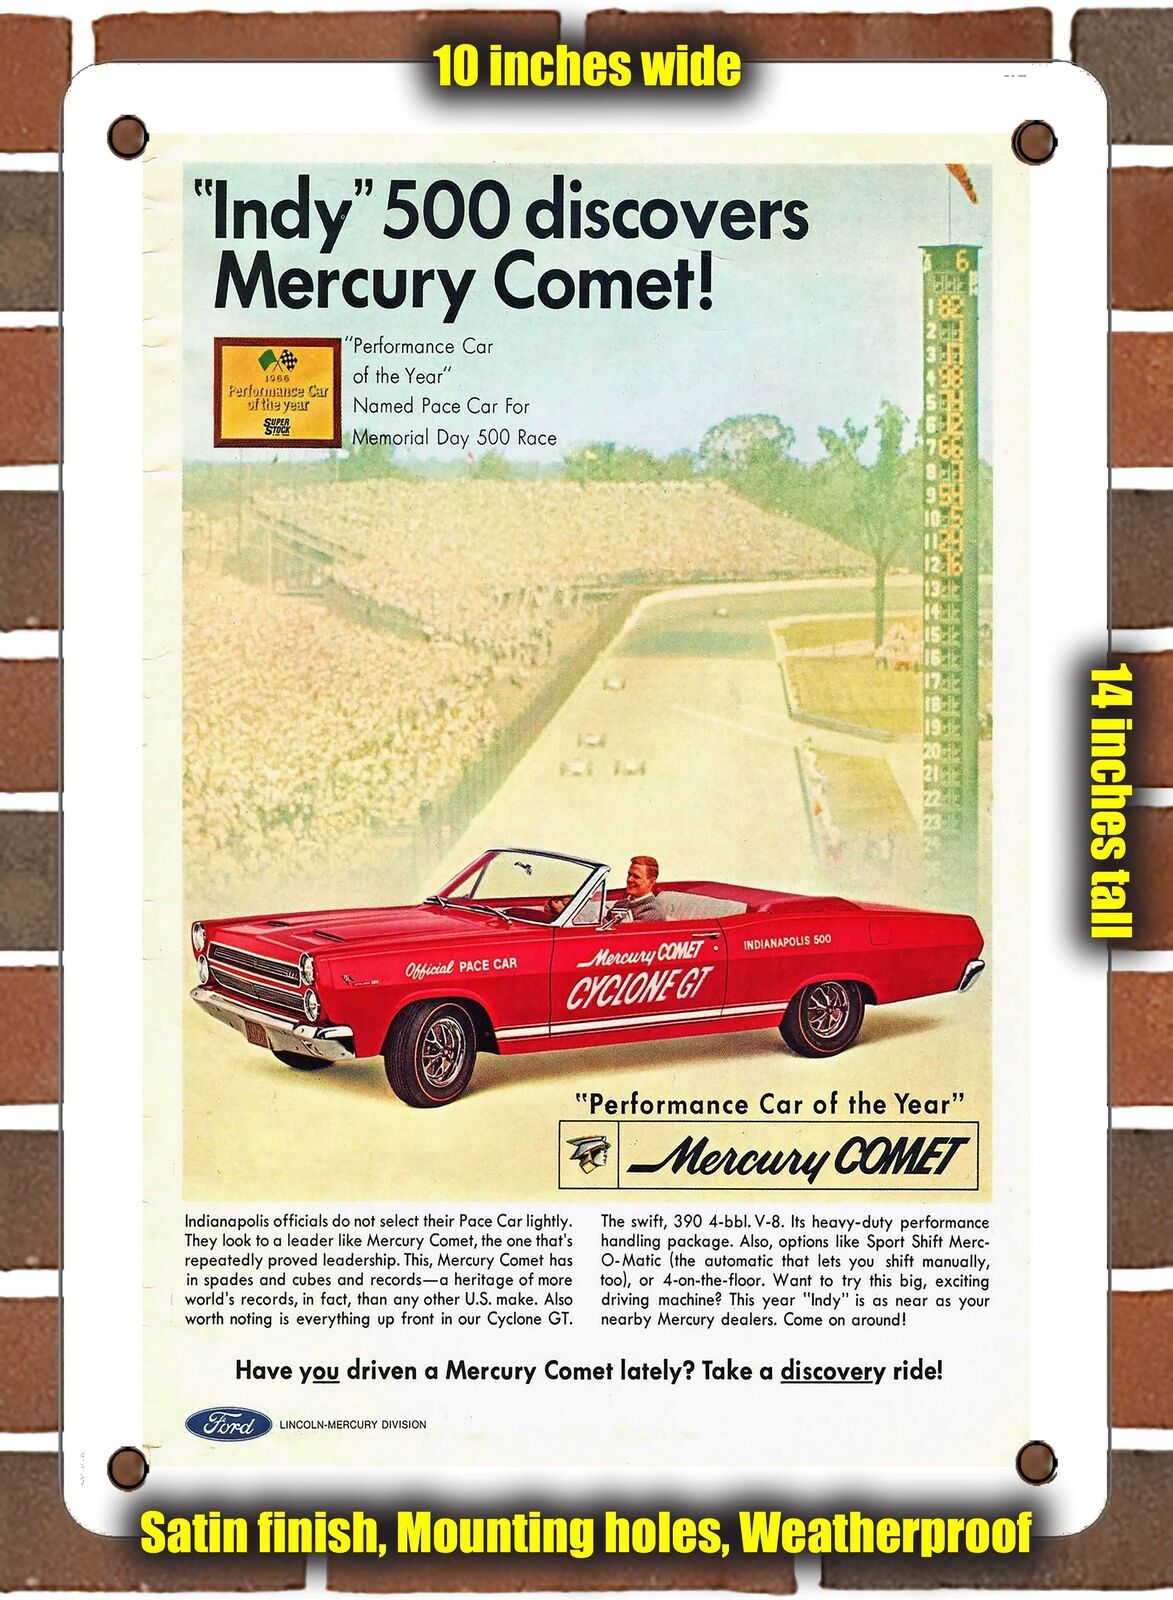 METAL SIGN - 1966 Mercury Comet Cyclone GT Indy 500 Pace Car 2 - 10x14 Inches